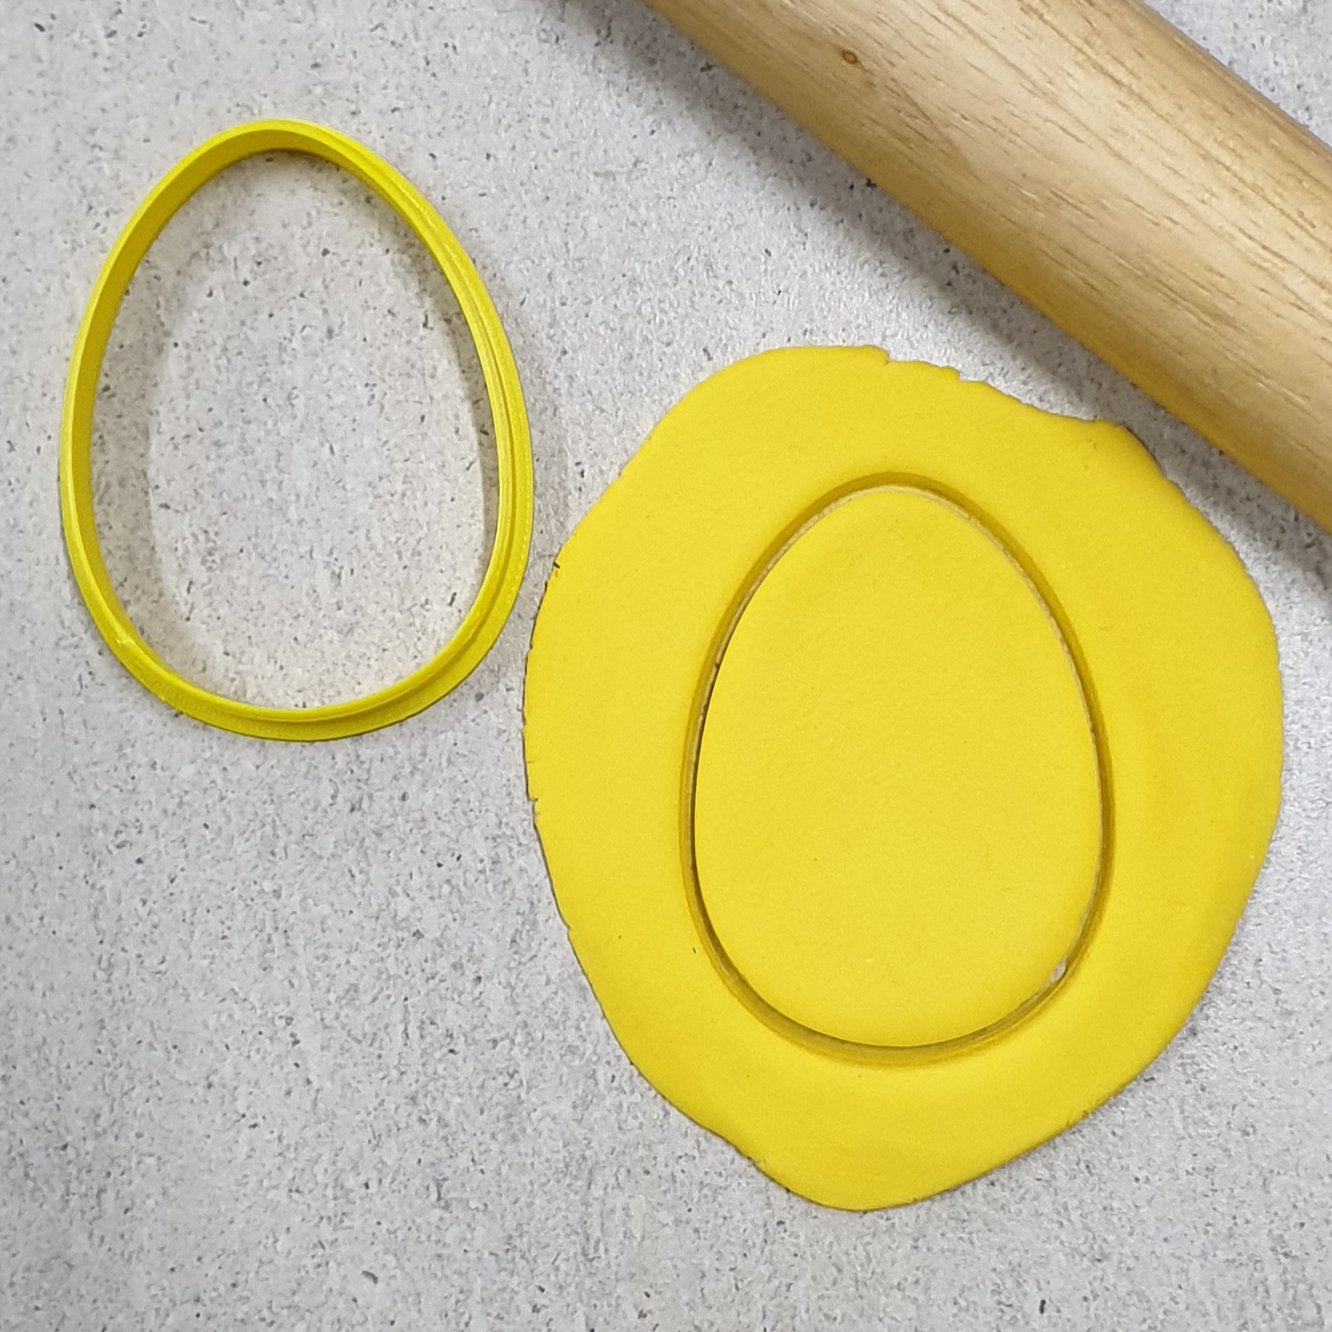 EGG 3.5INCH - 89mm PLASTIC COOKIE CUTTER - Cake Decorating Central